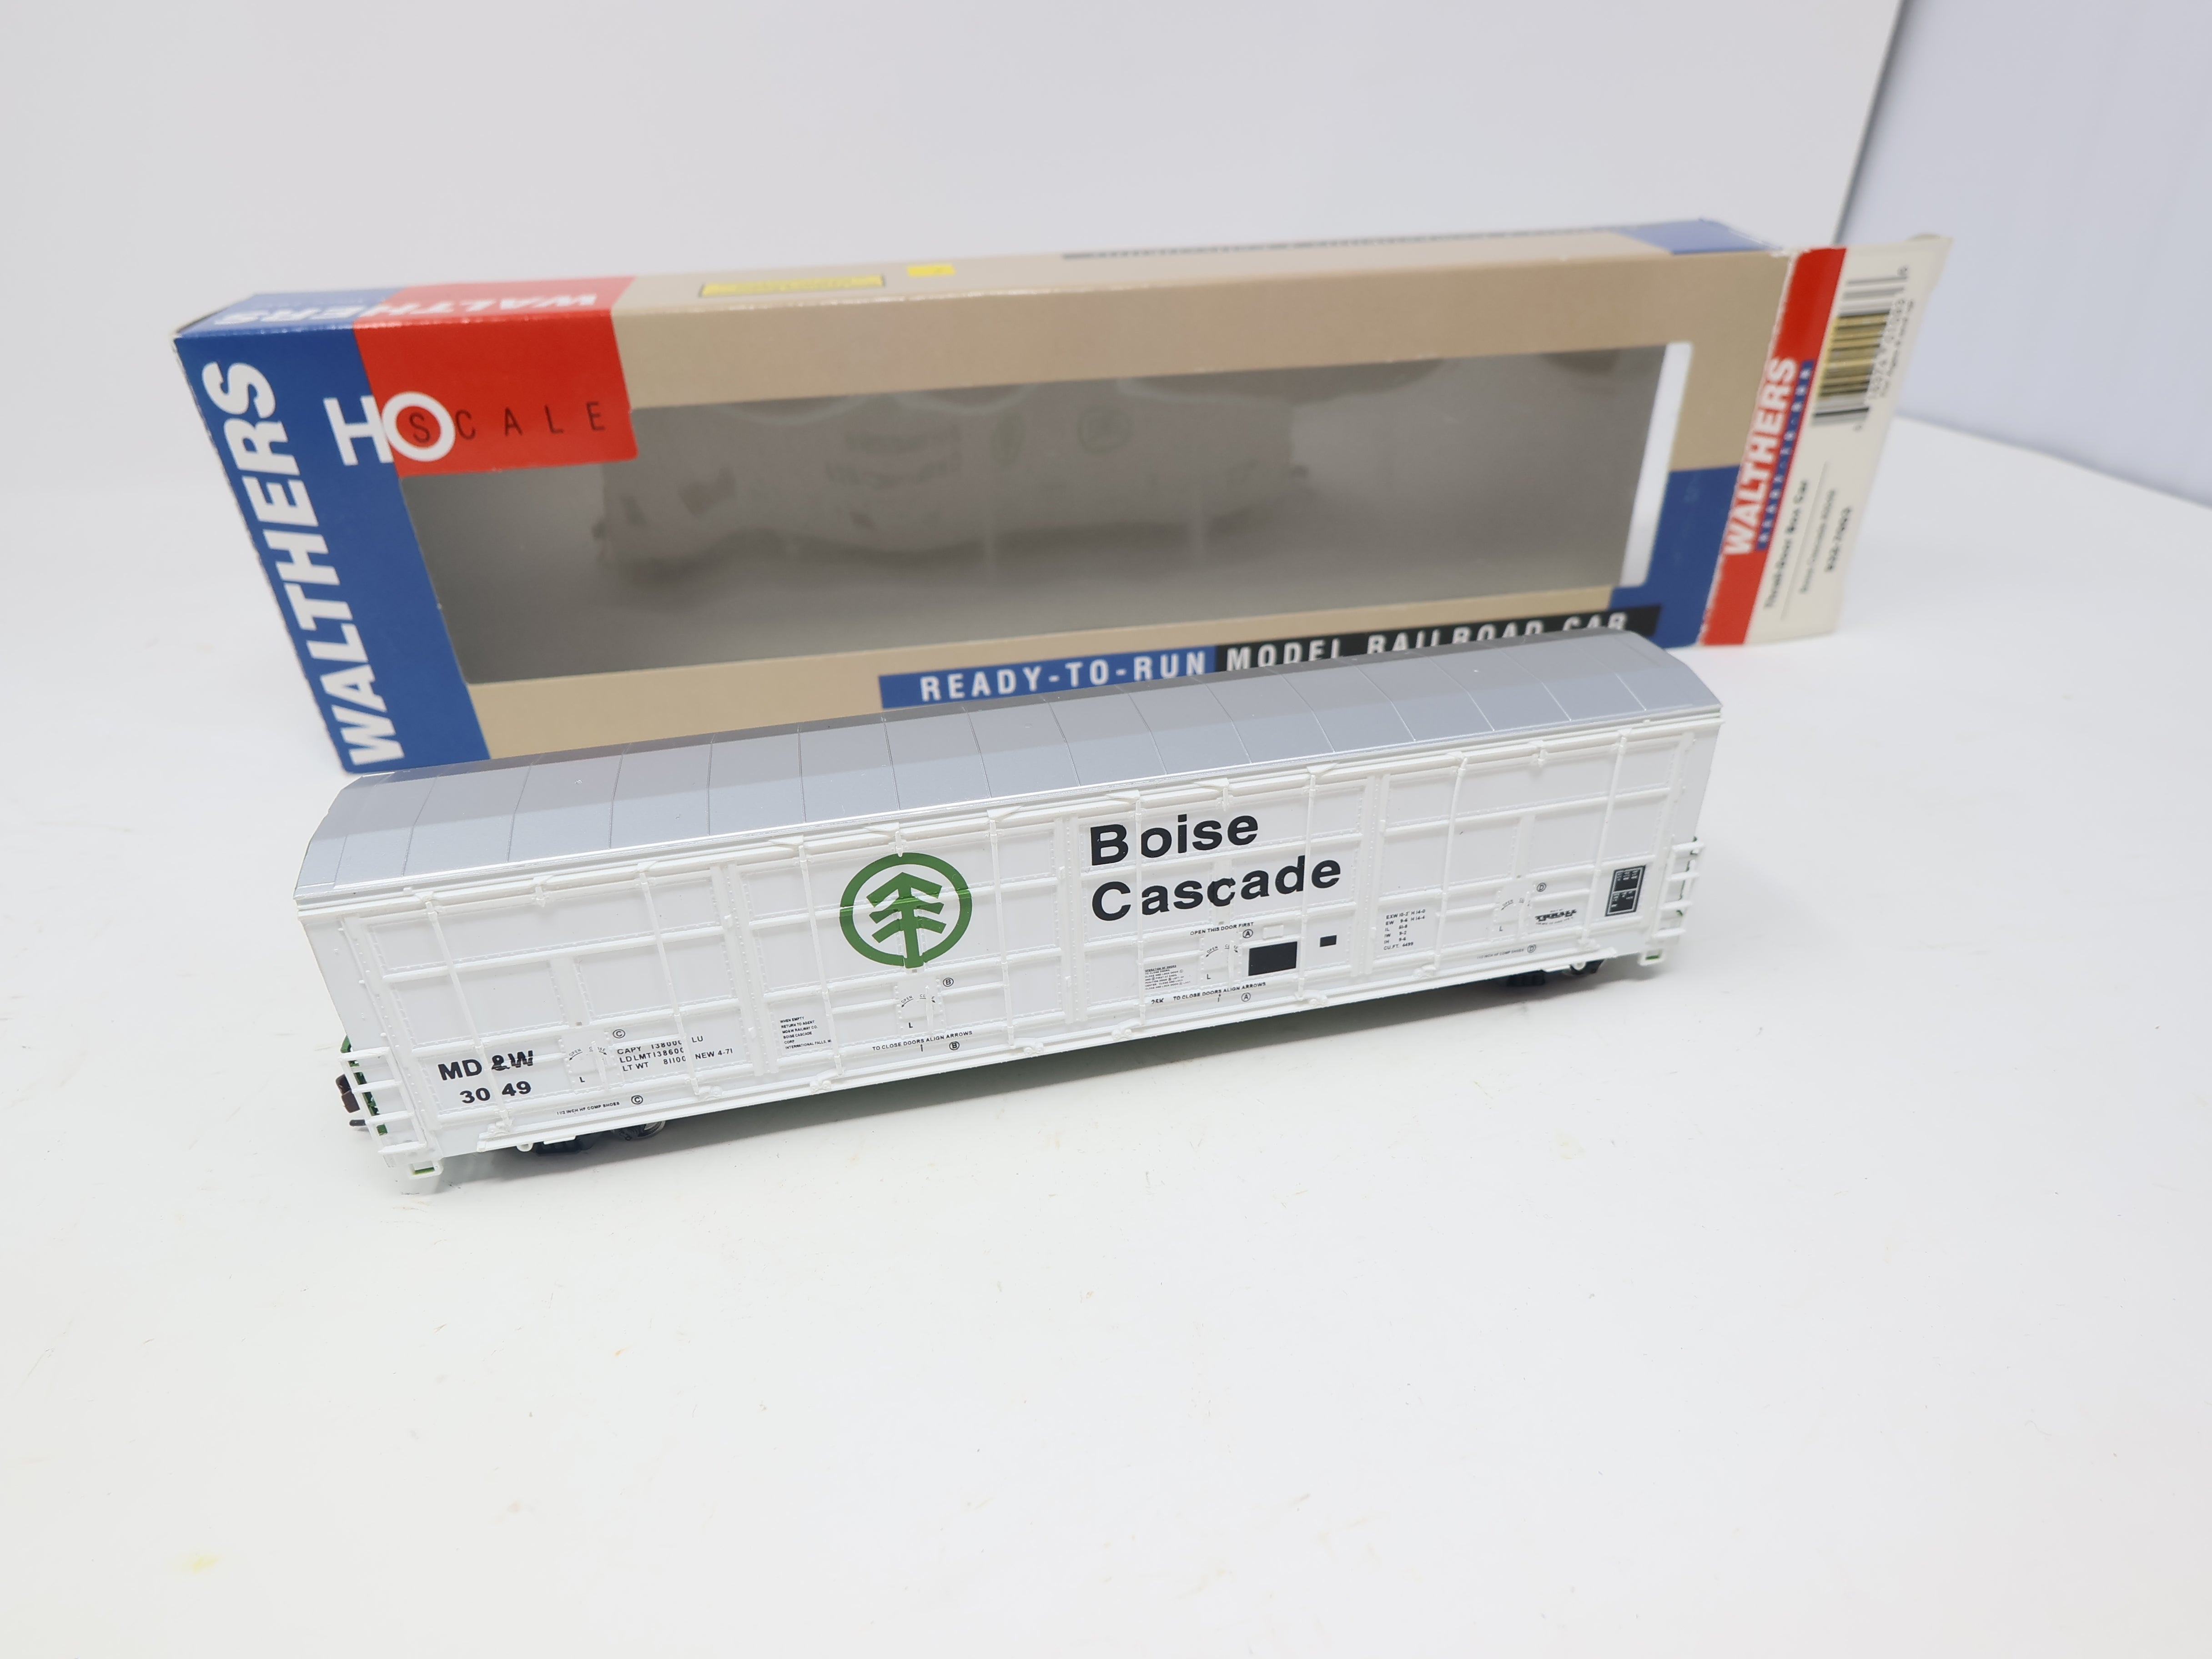 USED Walthers 932-7003 HO Scale, Thrall-Door Box Car, Boise Cascade MD&W #3049